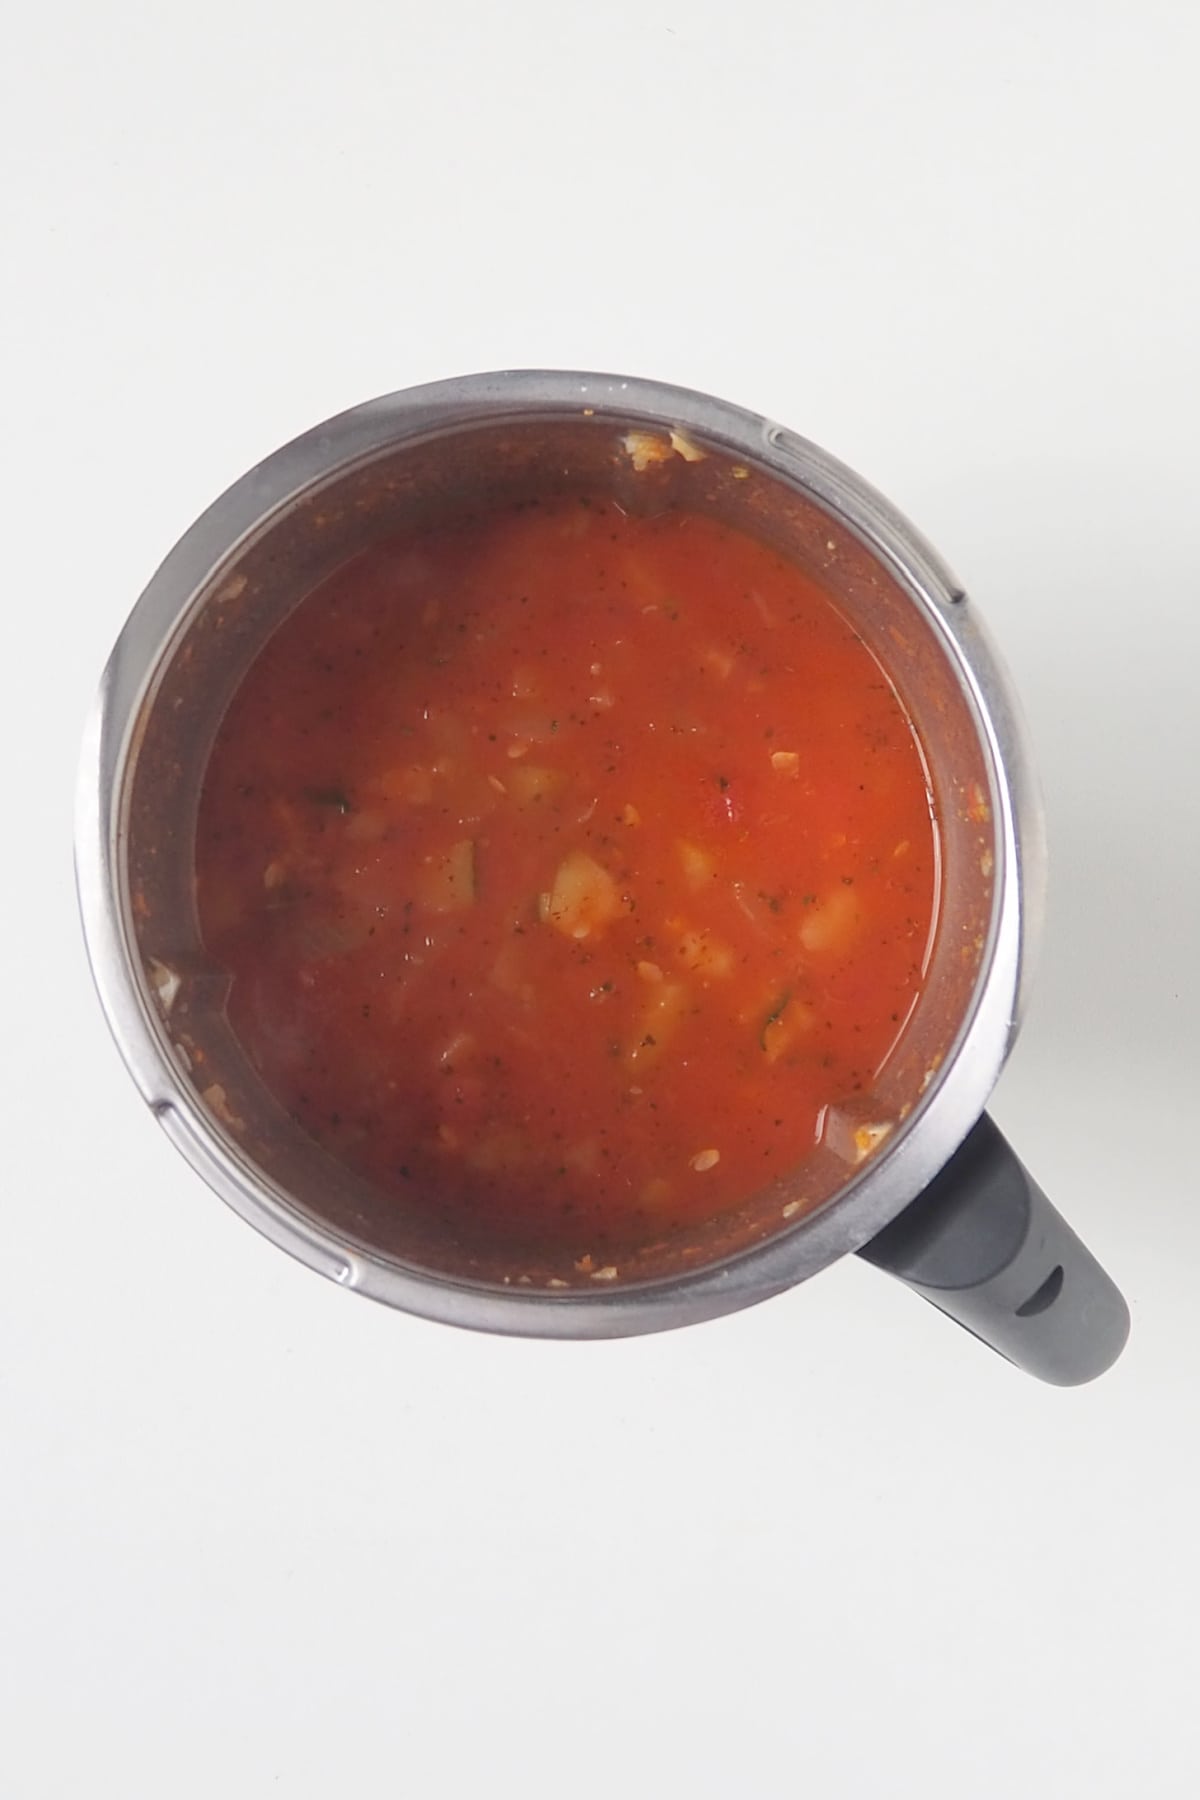 Cooked Spicy Tomato Soup in a thermomix bowl.